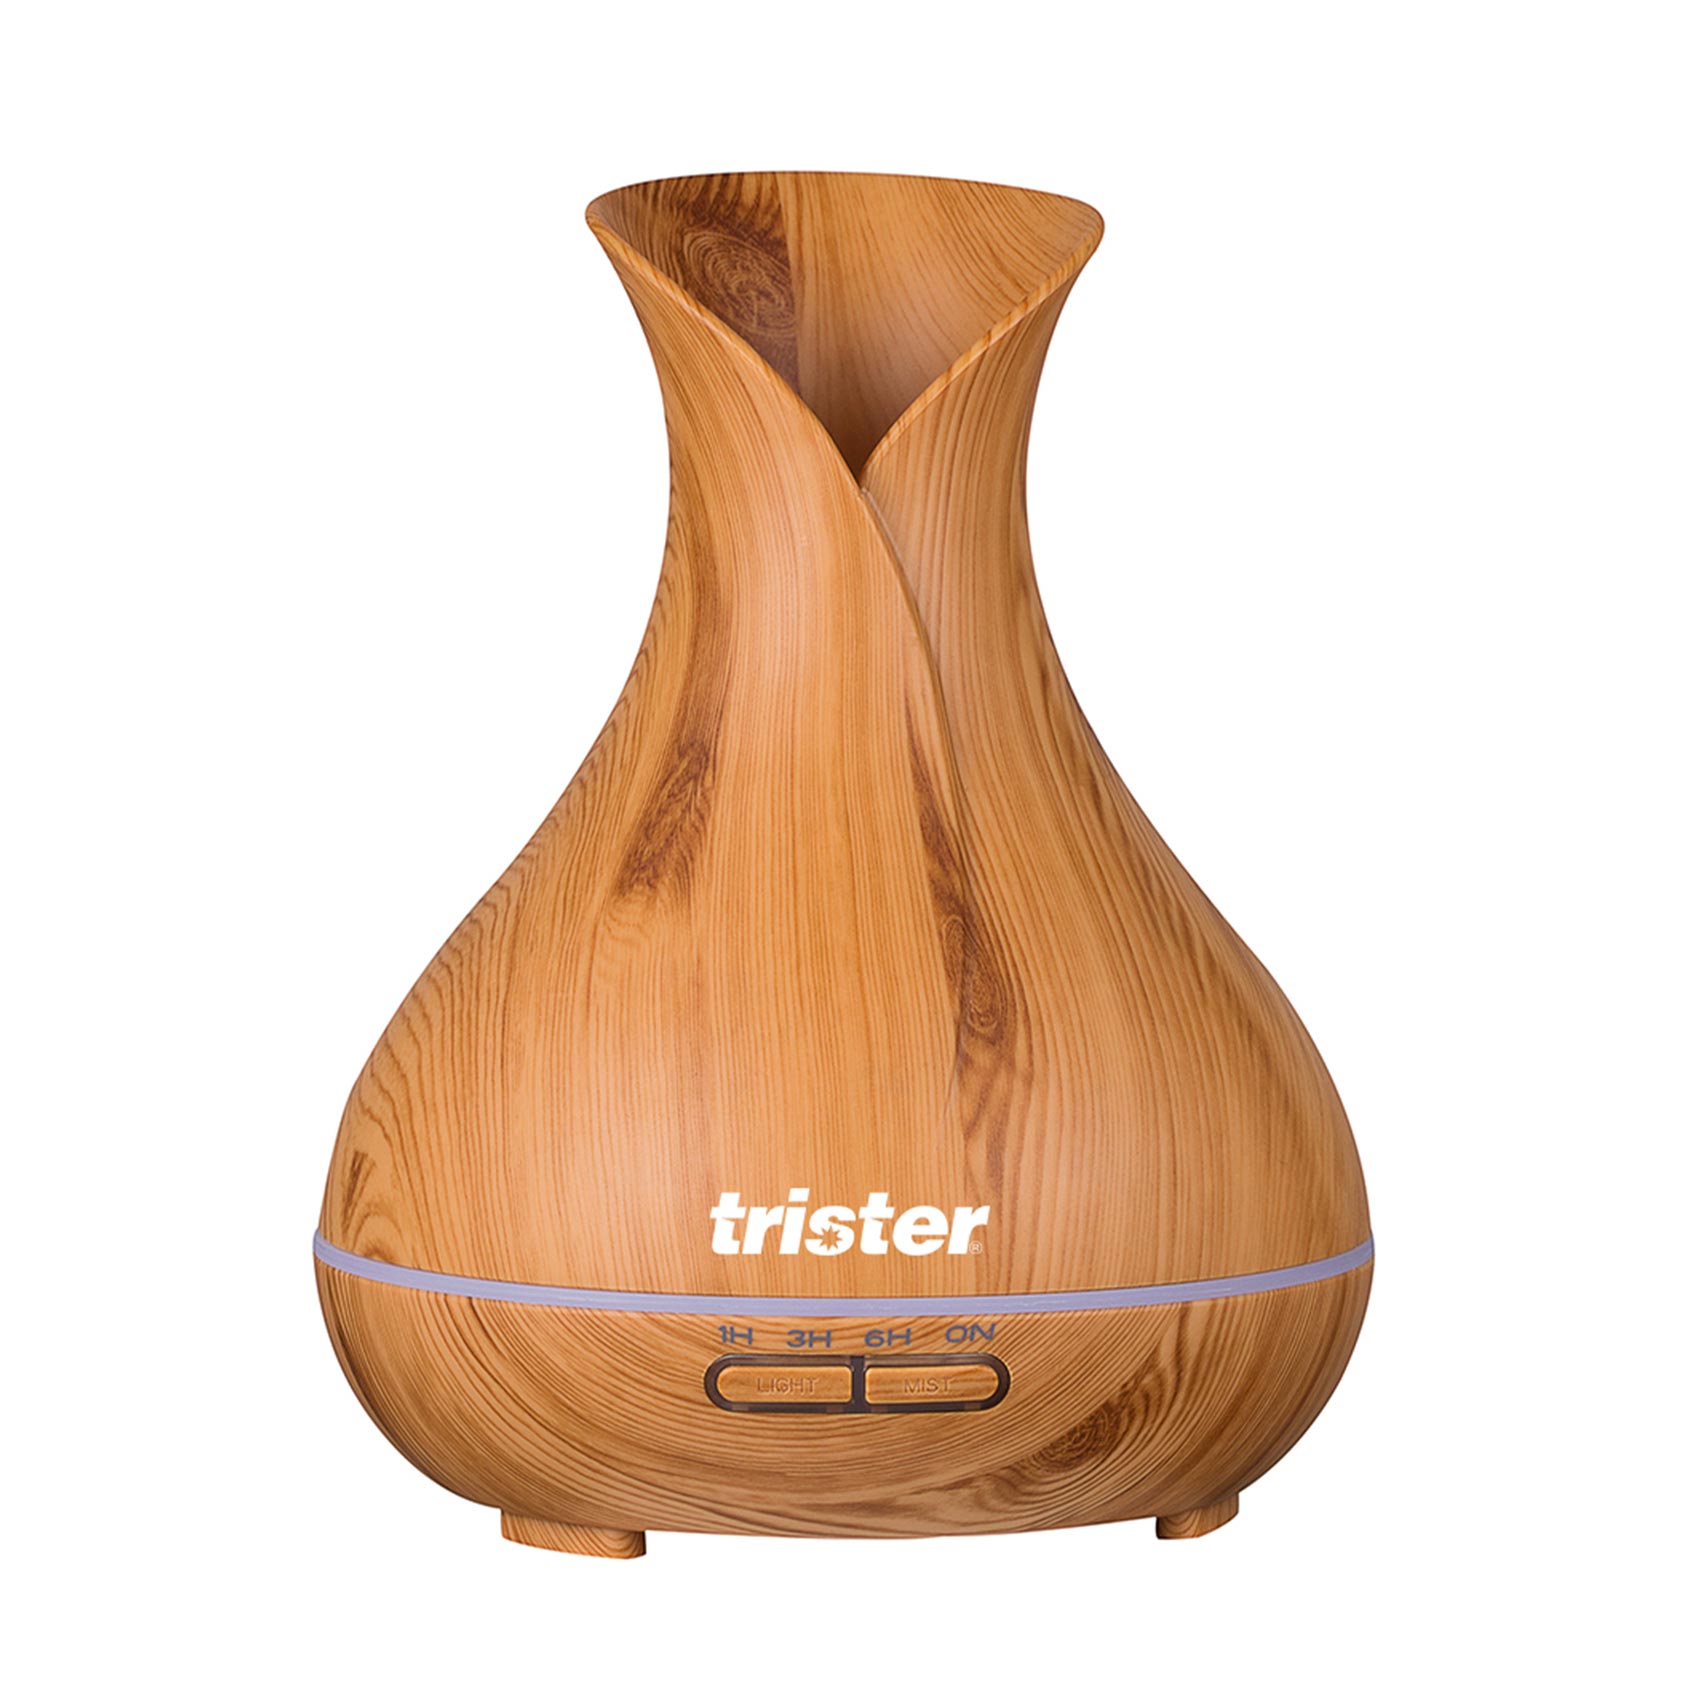 Trister Ultrasonic Essential Oil Aroma Diffuser: Wood TS-120AD-W - Trister